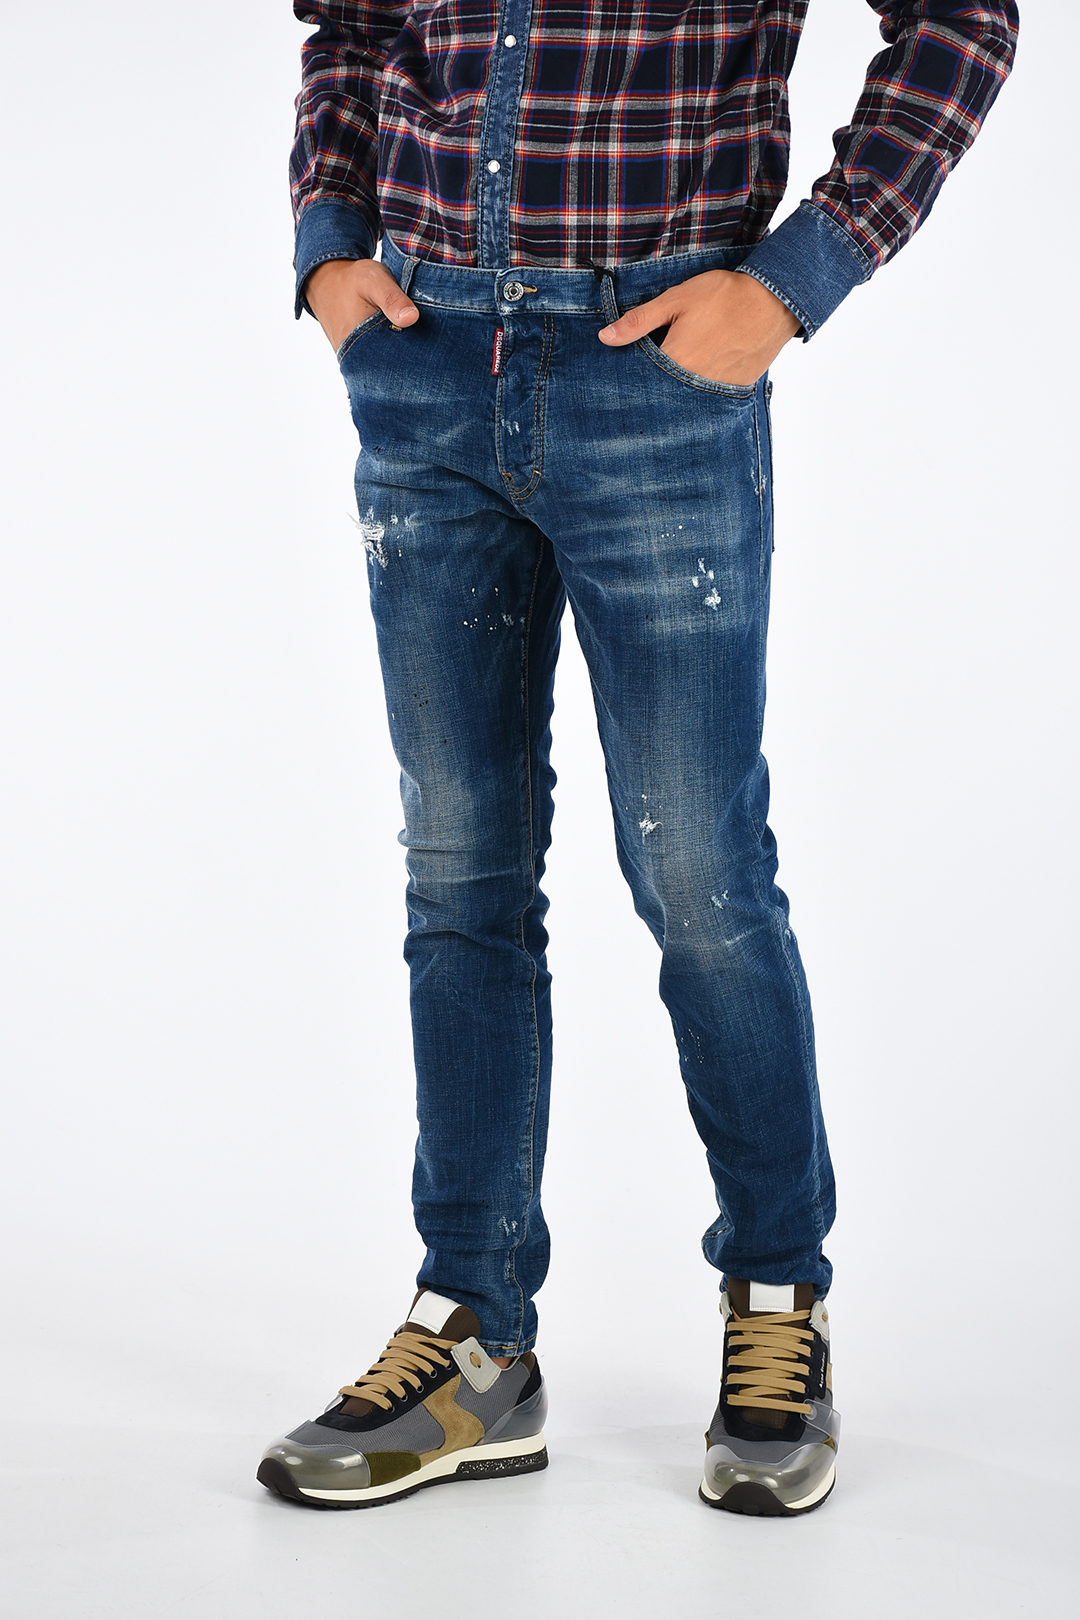 Dsquared2 COOL GUY JEANS men - Glamood 